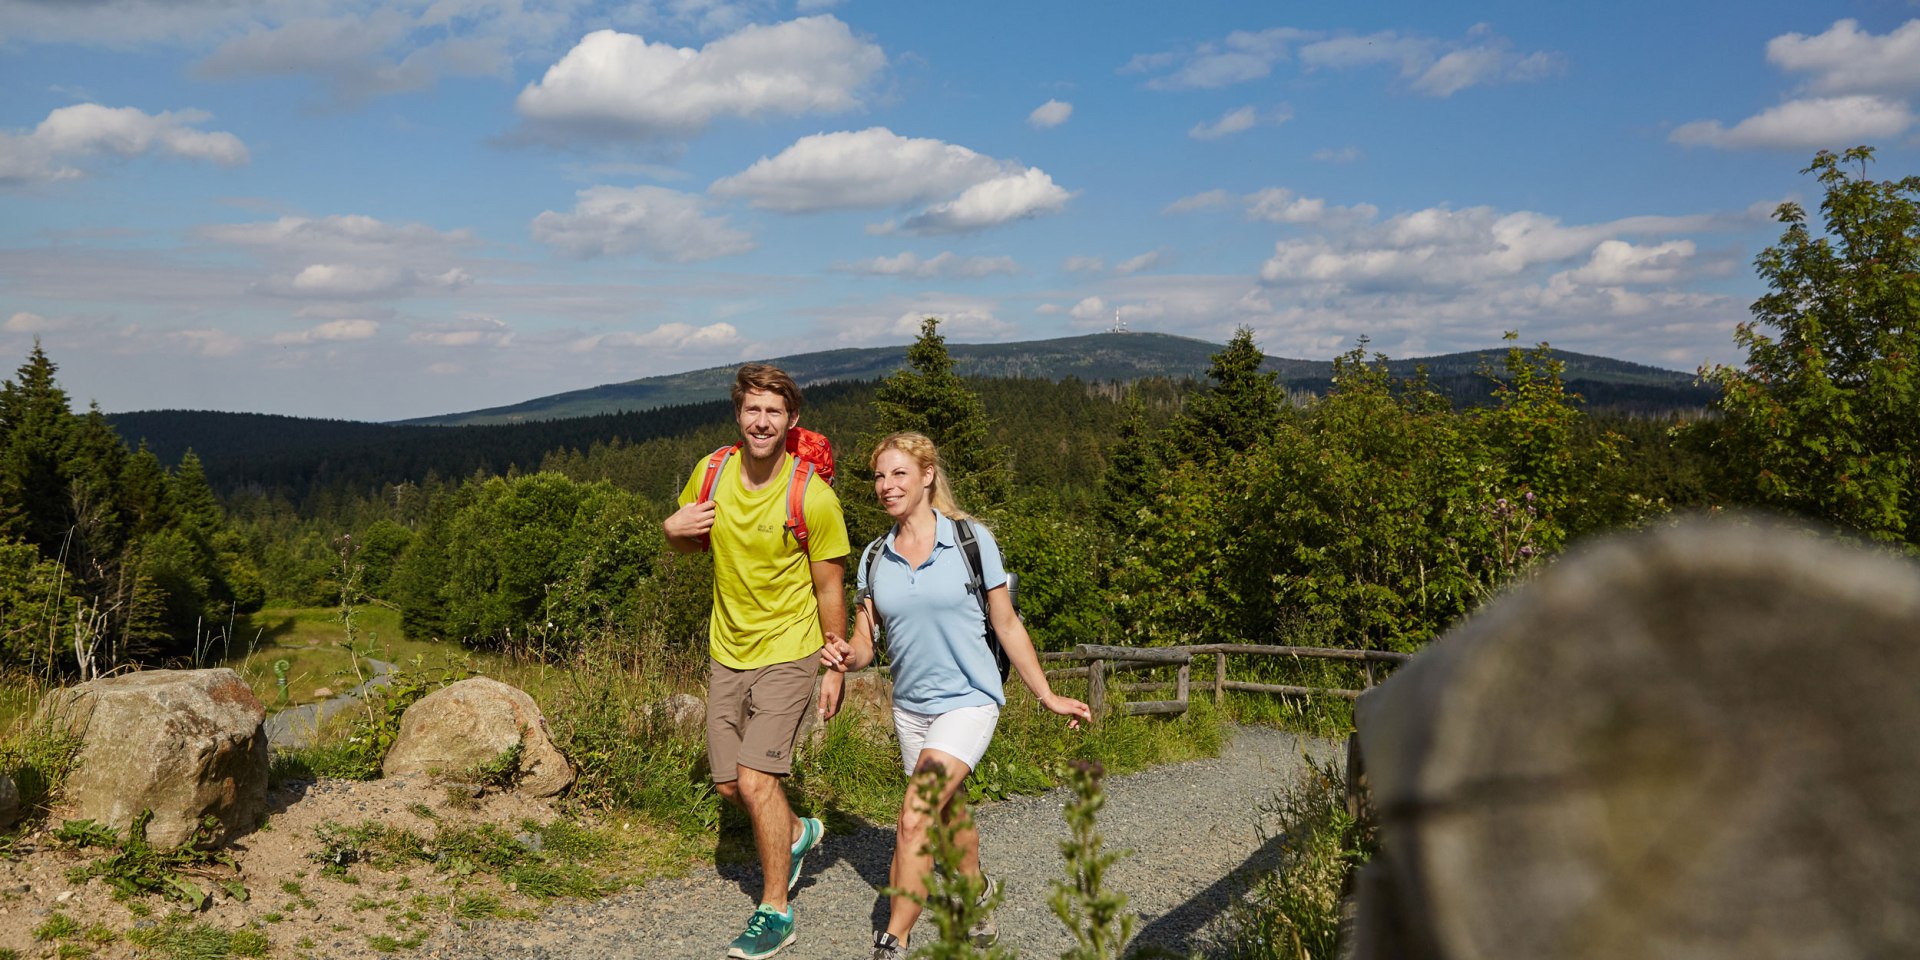 Hikers around Torfhaus in the Harz Mountains, © Harzer Tourismusverband/ M. Gloger